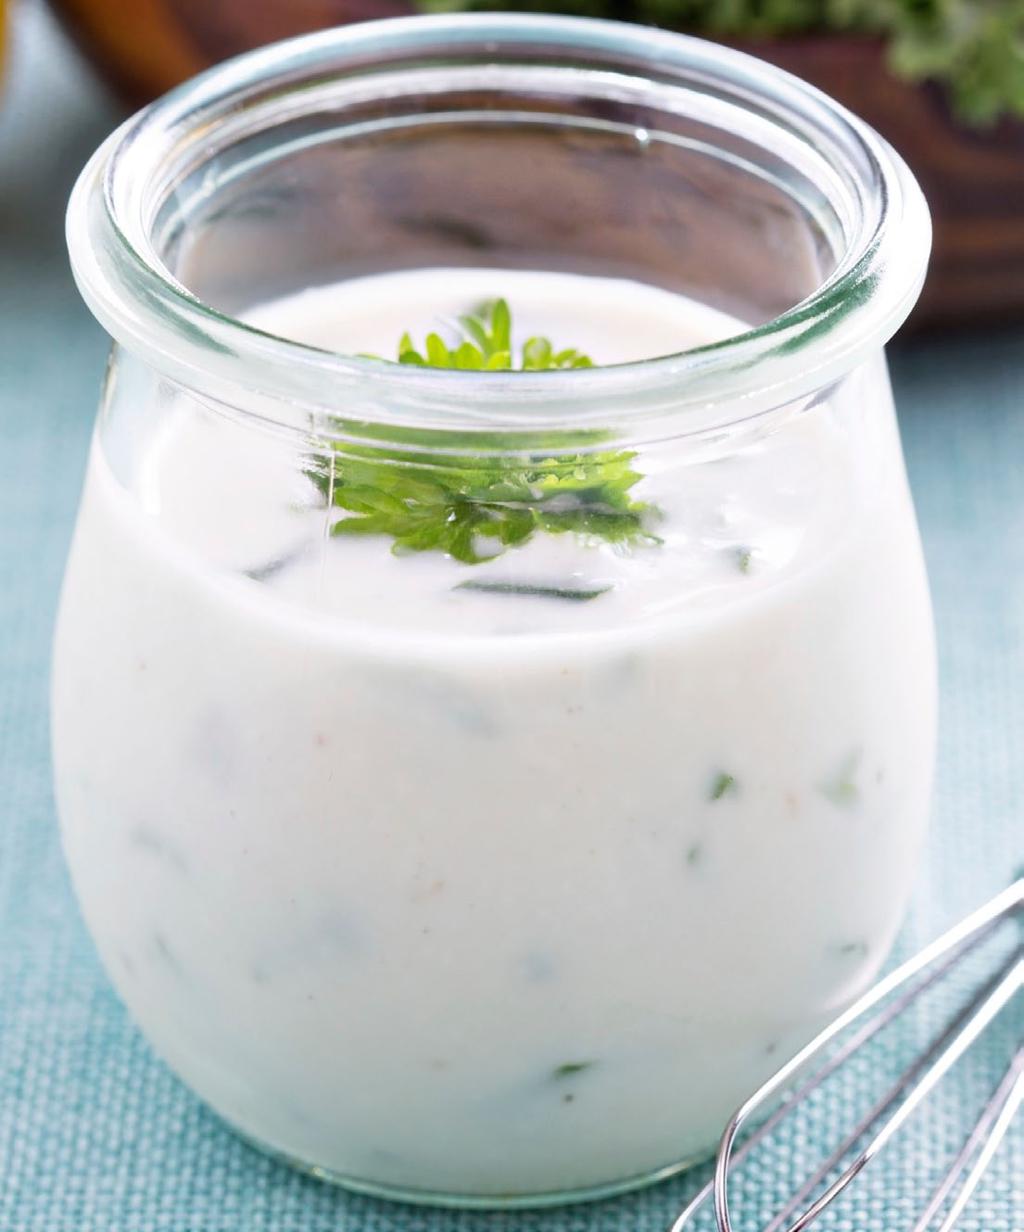 DRESSINGS Homemade Ranch Dressing Recipe makes 1 serving; recipe can be made to make multiple servings at once 1/4 cup plain, nonfat Greek